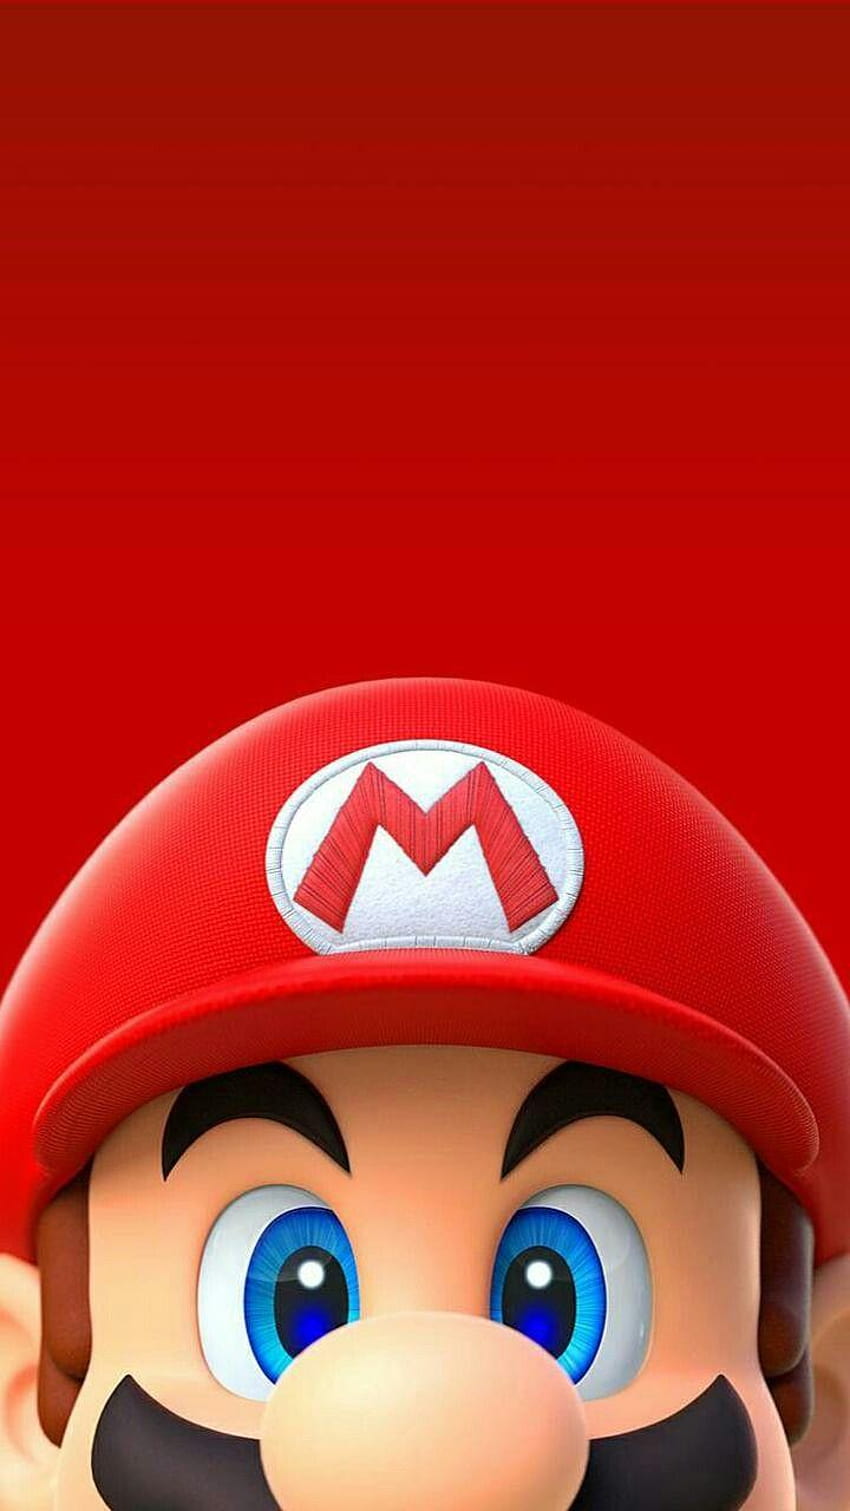 Made a mobile wallpaper from the new Super Mario Bros 2022 poster   riphonewallpapers